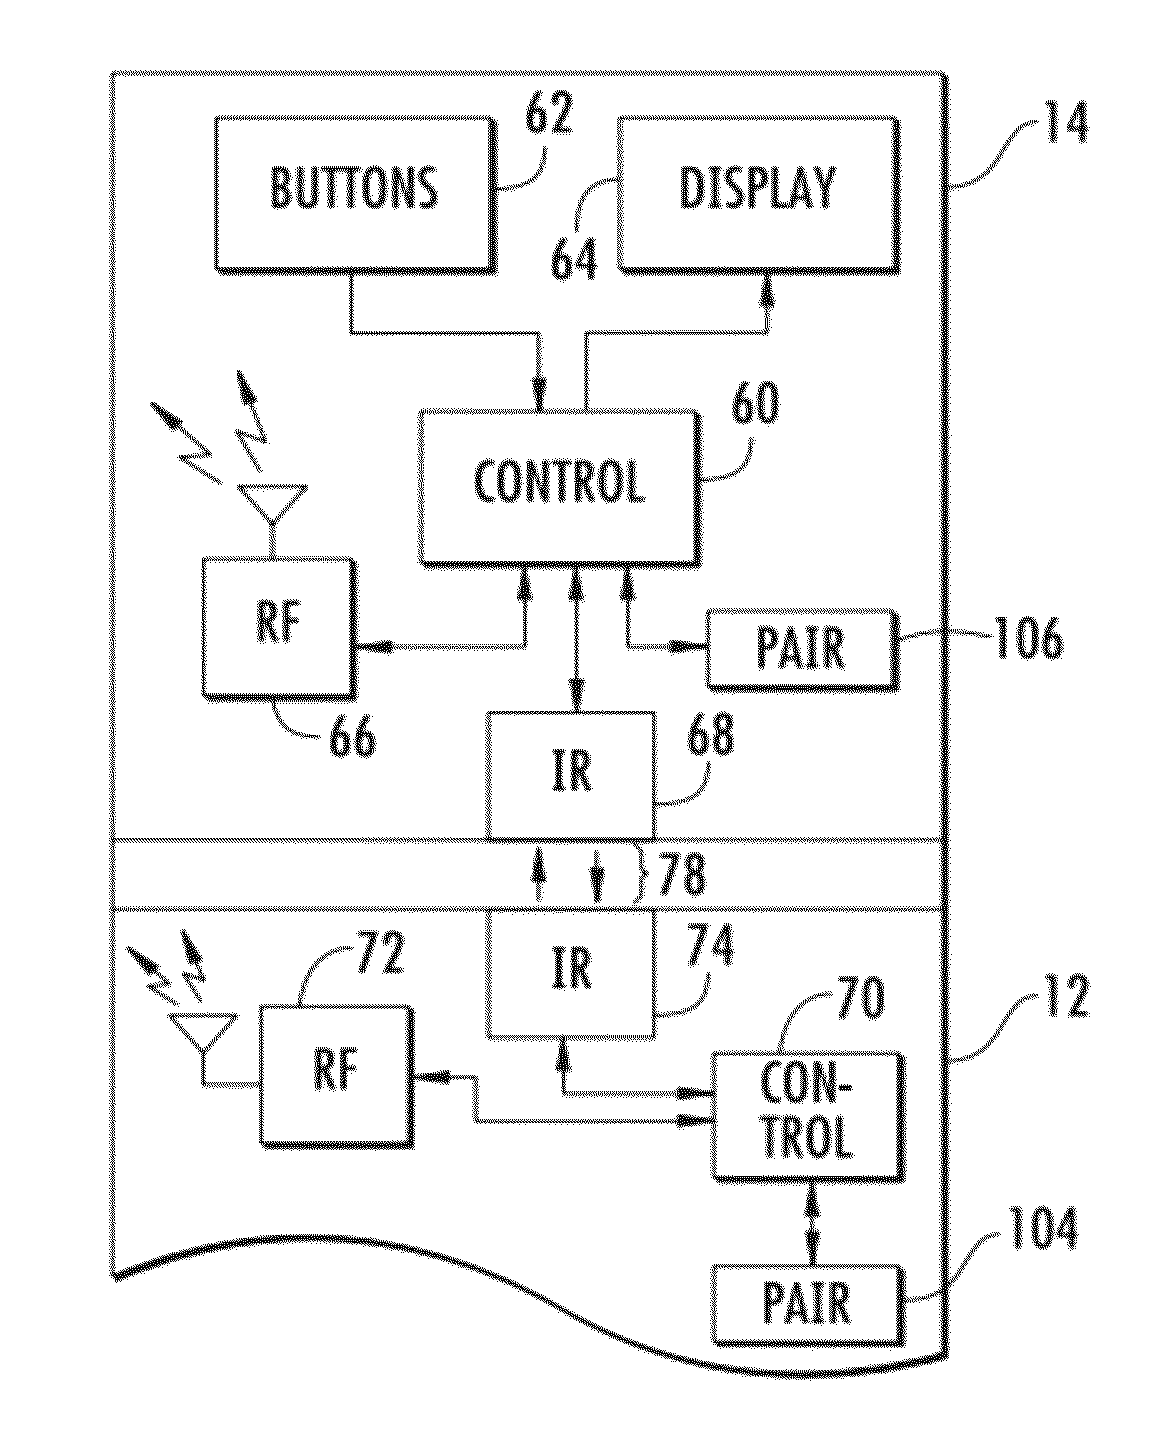 Digital multimeter having remote display with automatic communication binding